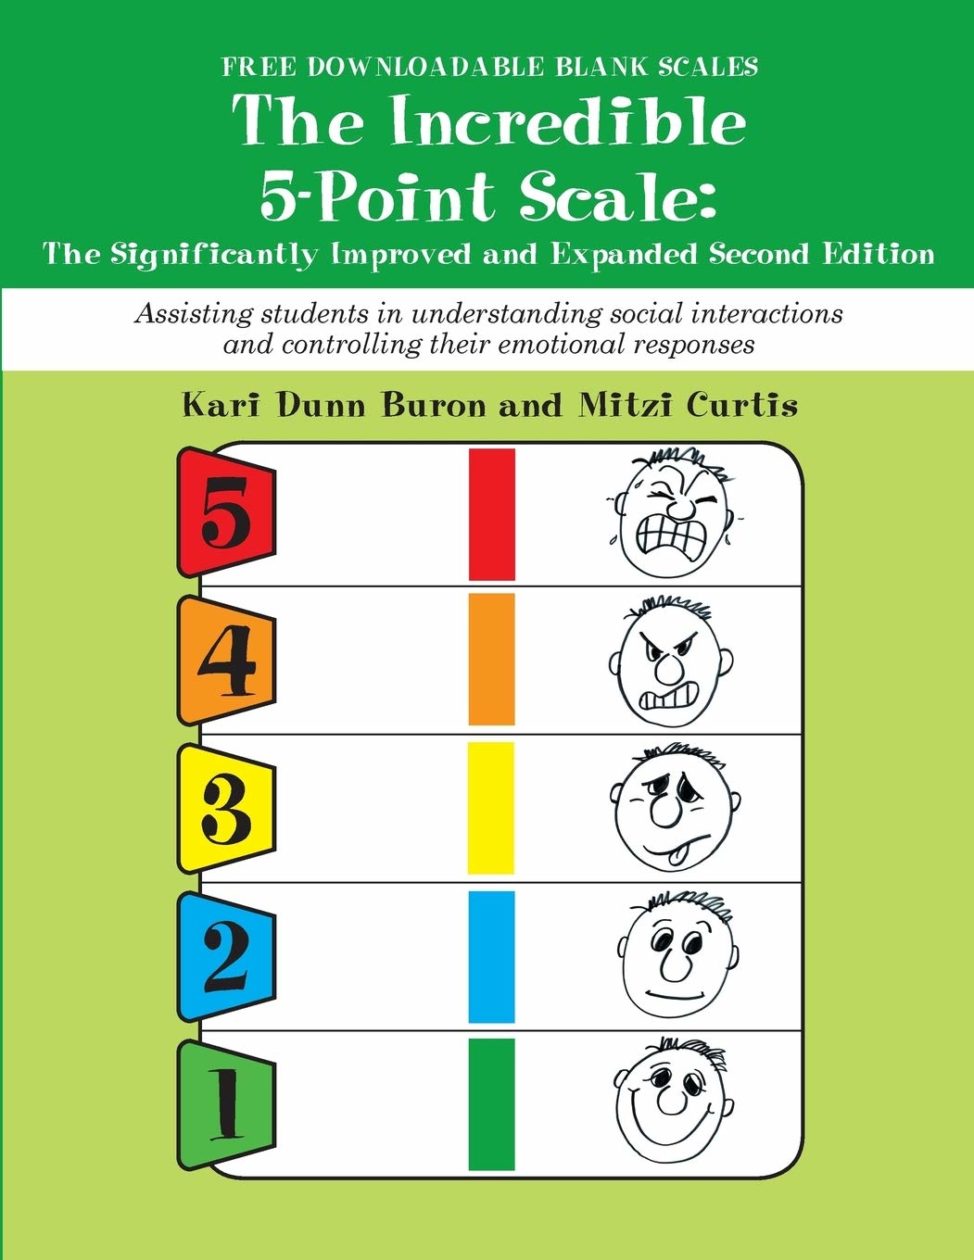 Cover of The Incredible 5 Point Scale book